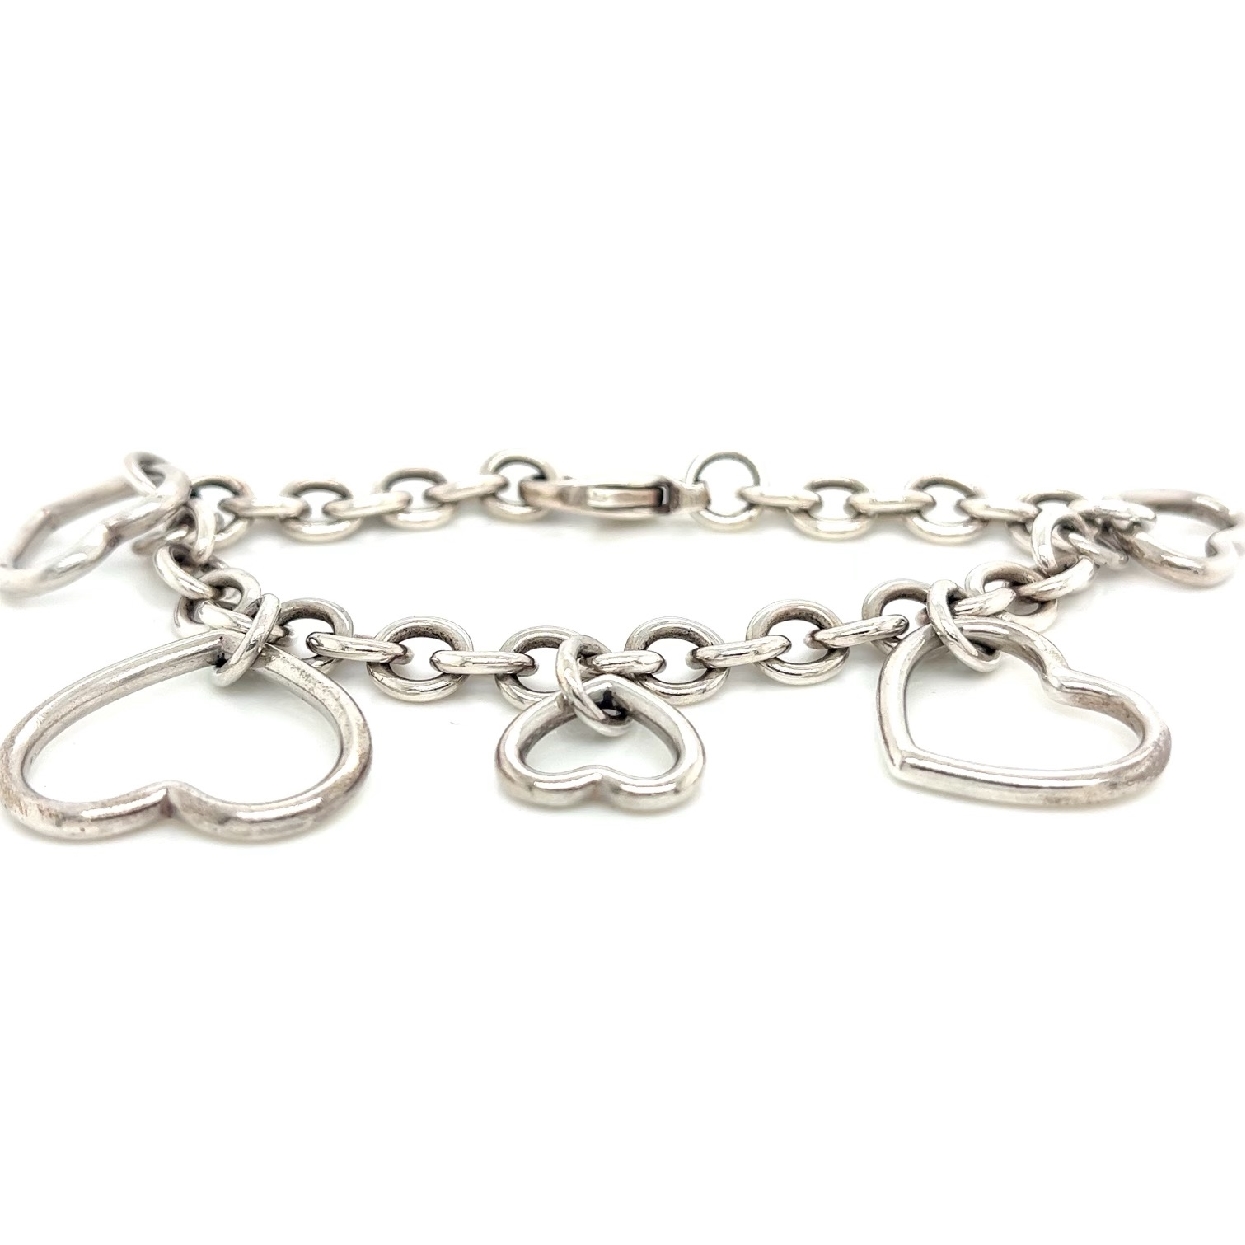 Tiffany and Co Sterling Silver Heart Chain Bracelet

7 Inches

With Bag